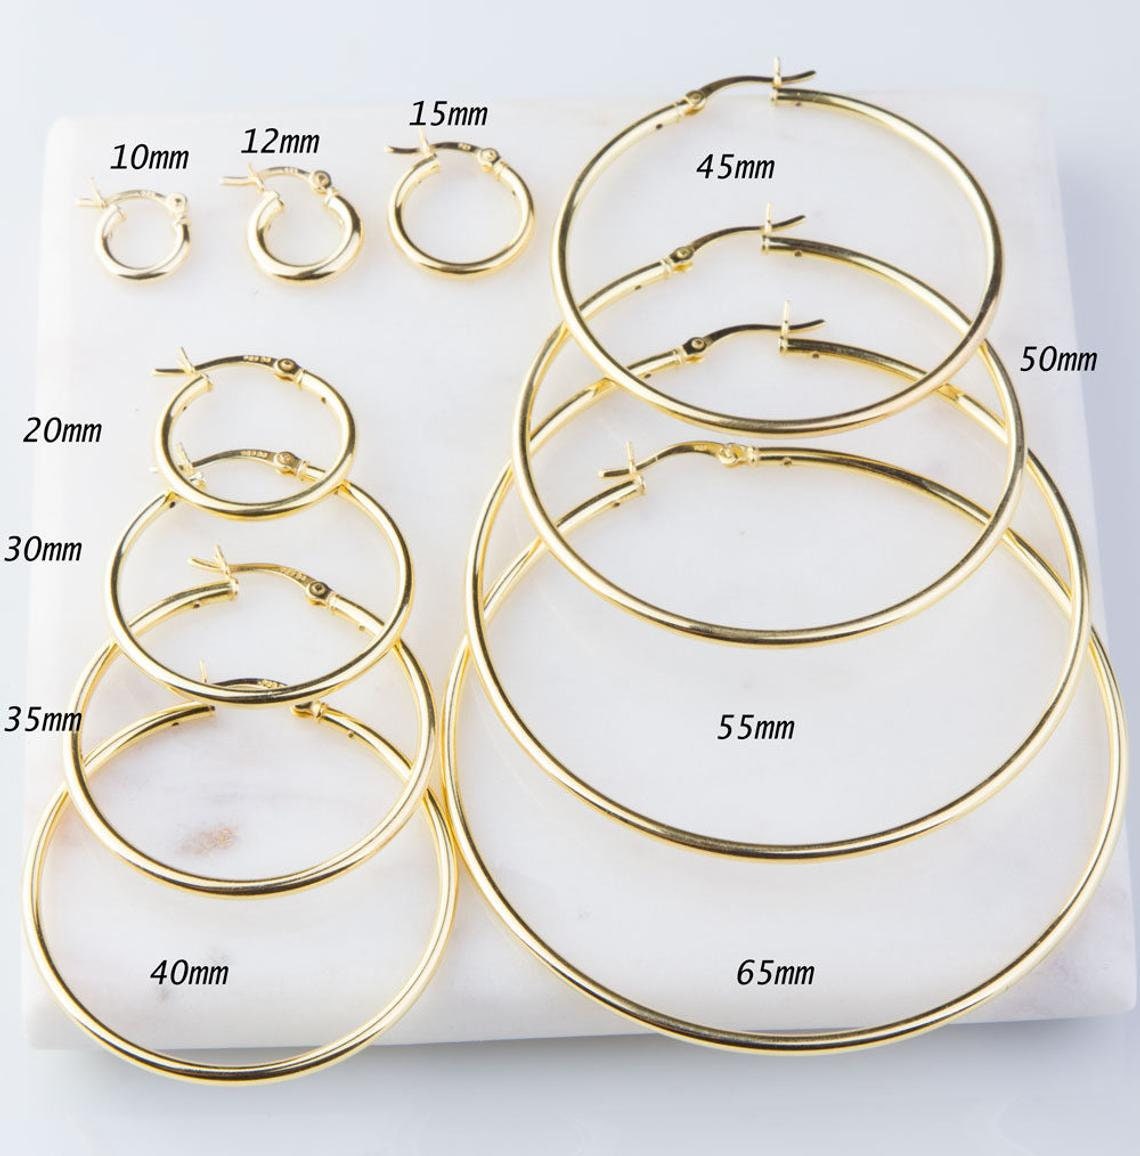 Classic Hoop Earrings  925 Silver  12mm Thickness  Small Sizes 10   HighSpark